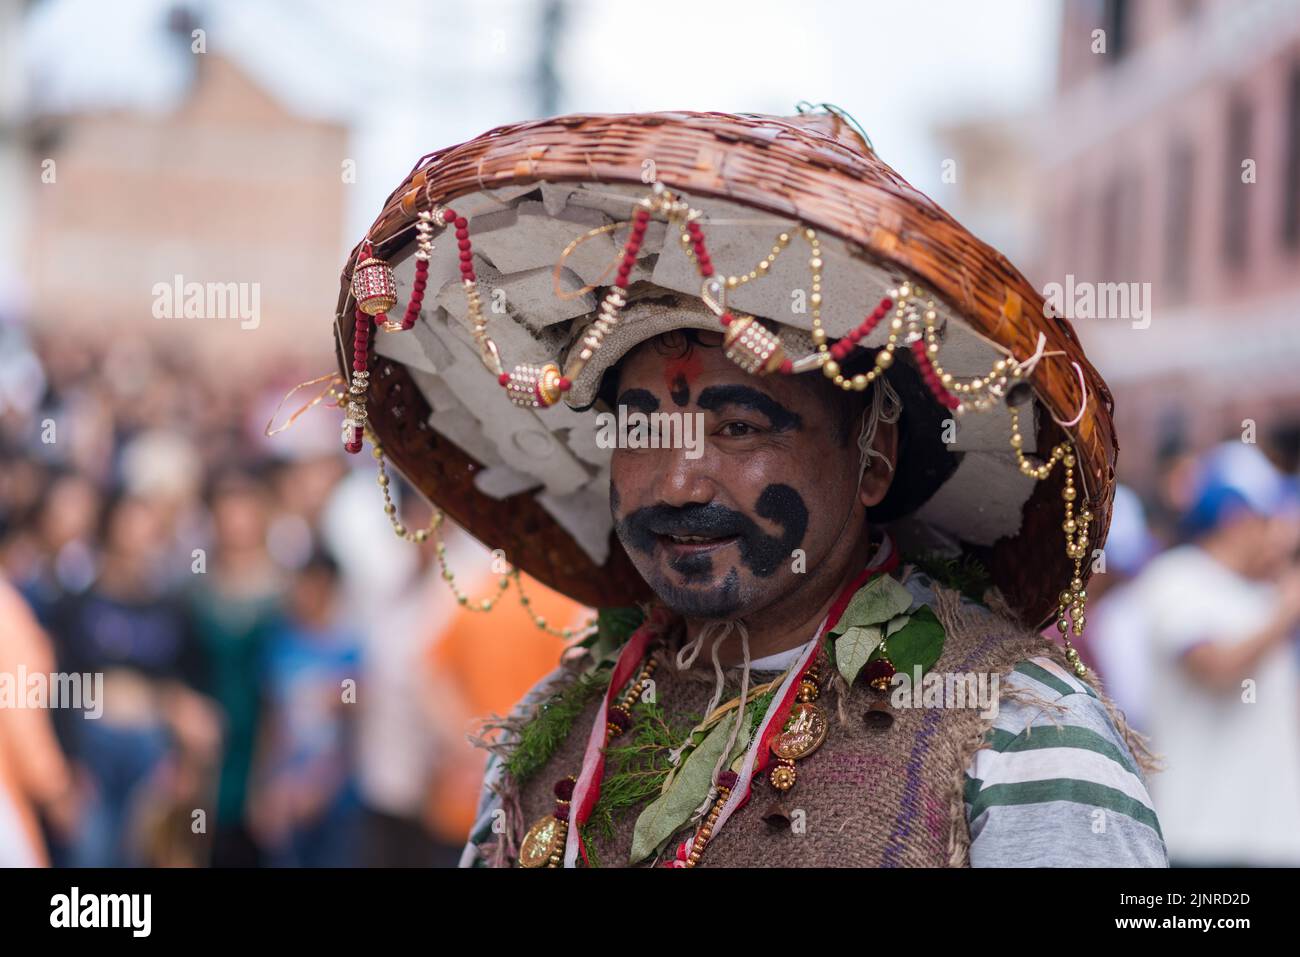 A man with painted face seen during the Gai Jatra or cow festival procession. People celebrate Gai Jatra or cow festival in memory of the departed souls in the past year for salvation and peace. It is believed that cows guide the departed souls to cross the river to get to heaven. Stock Photo